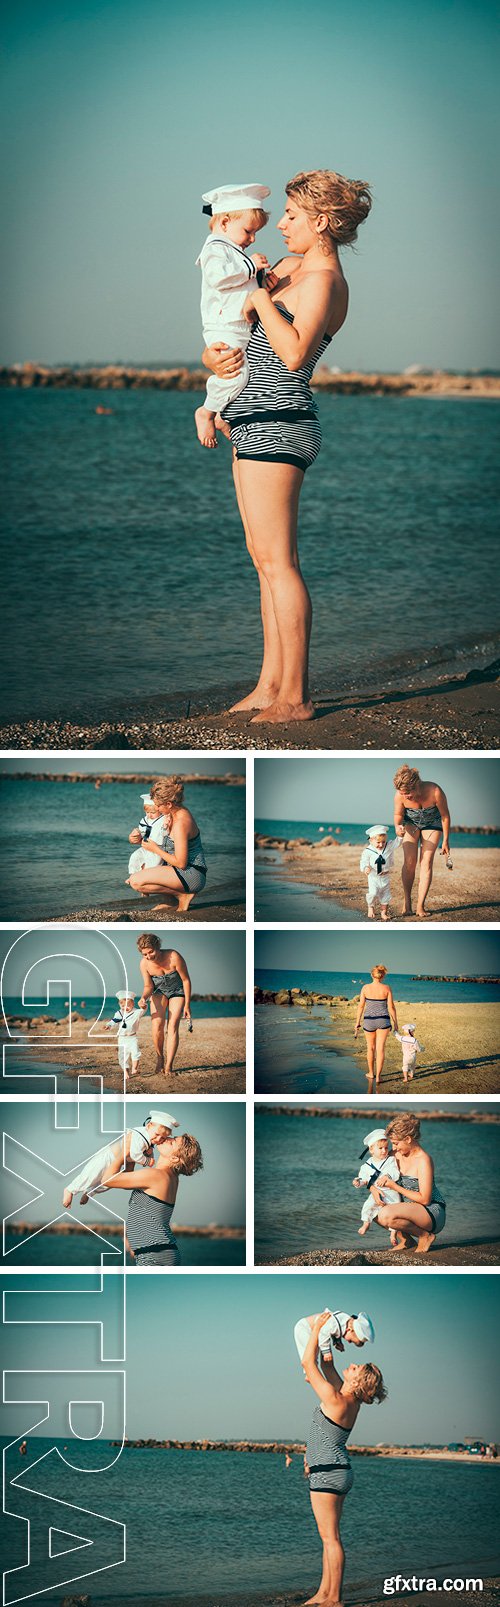 Stock Photos - Mother and son playing on the beach at the sunset time. Concept of friendly family